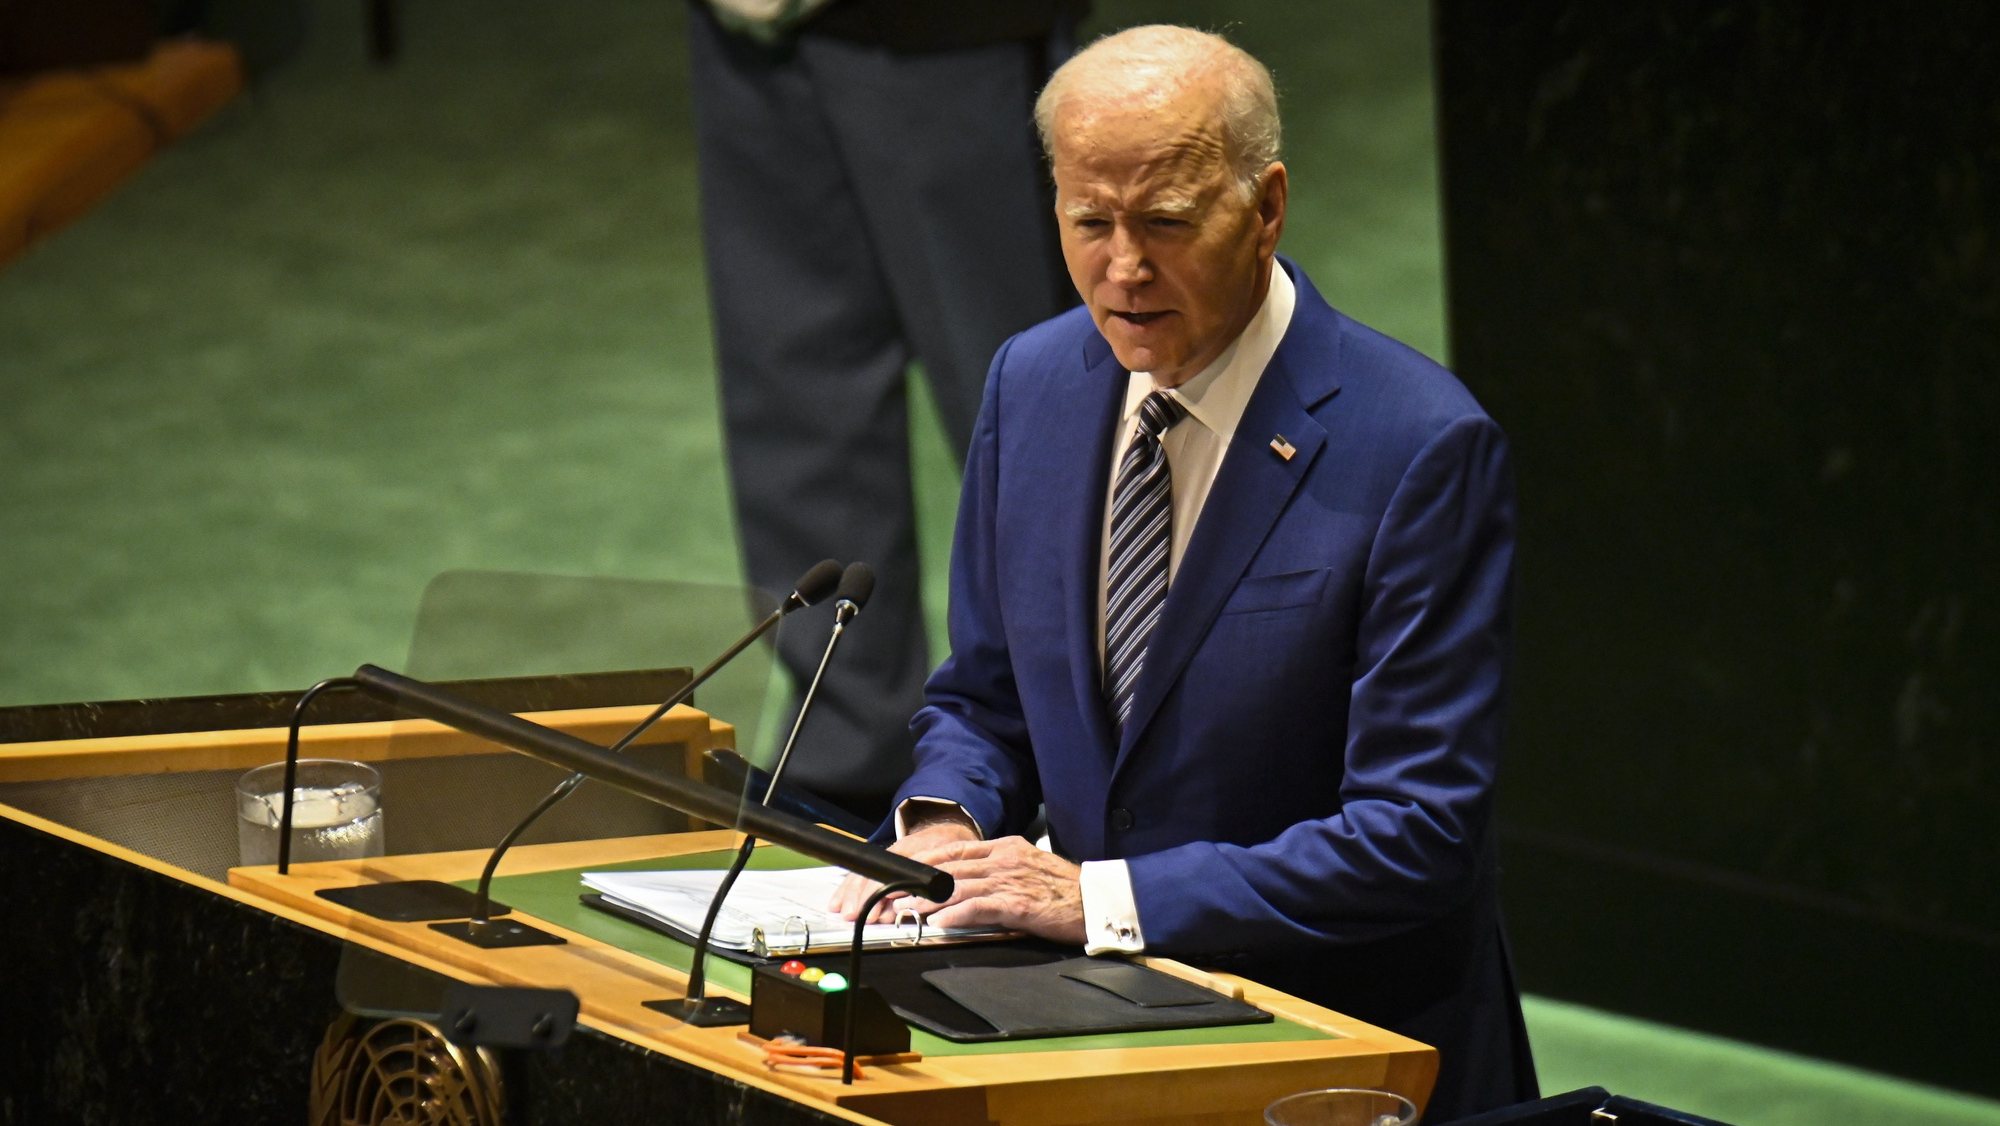 epa10869675 United States President Joe Biden addresses the delegates during the 78th session of the United Nations General Assembly at United Nations Headquarters in New York, New York, USA, 19 September 2023.  EPA/MIGUEL RODRIGUEZ